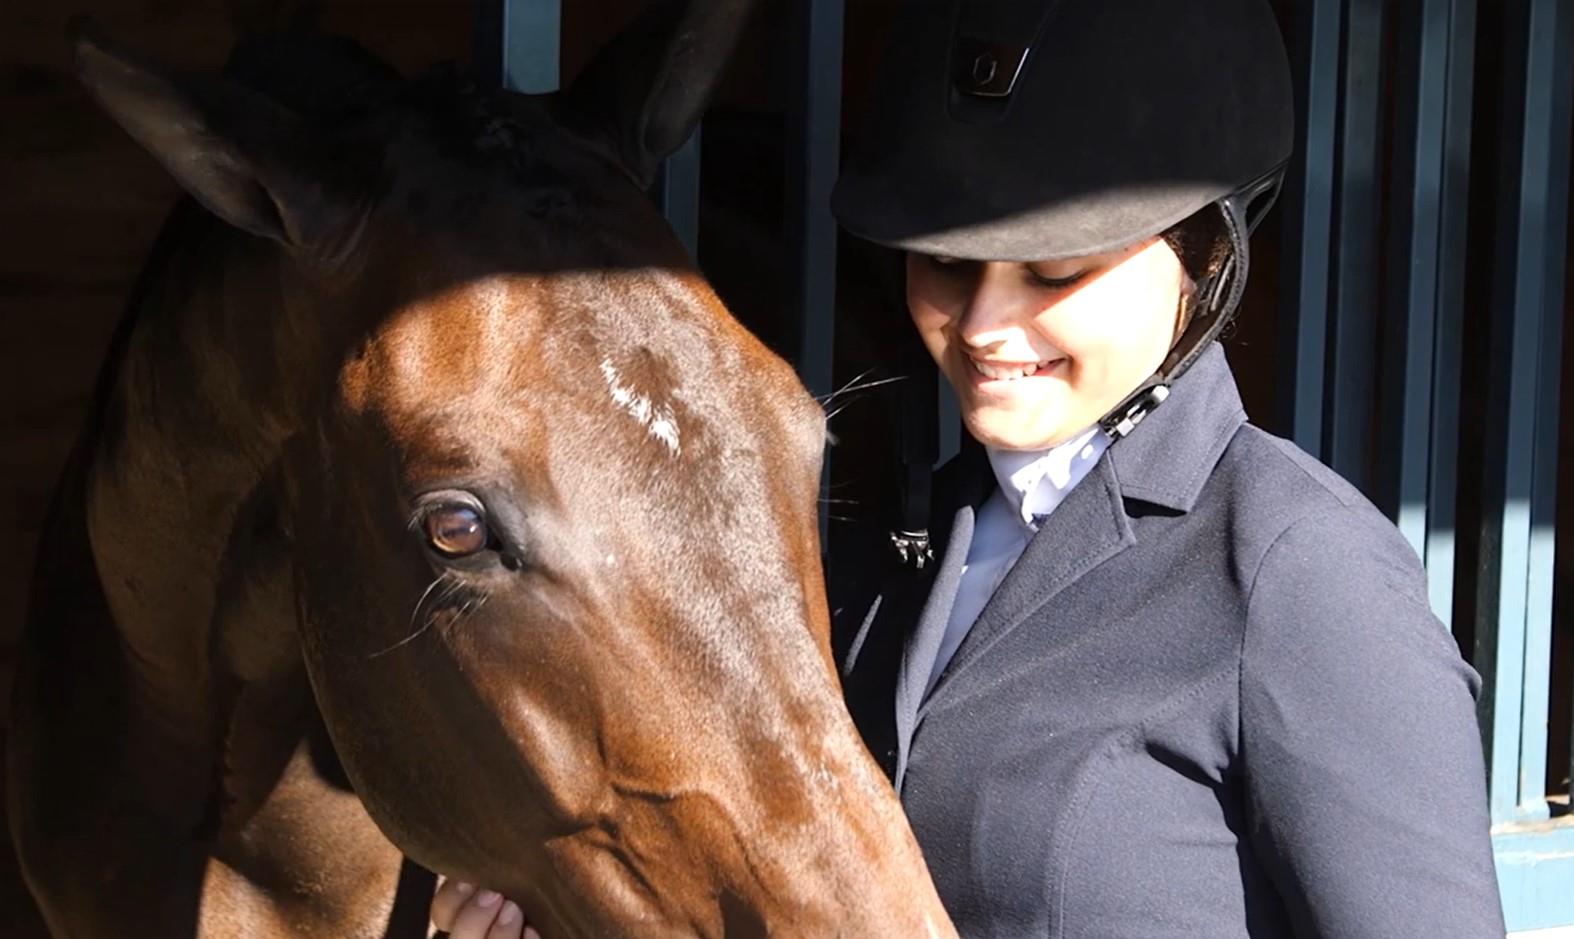 US Equestrian: Protecting Horse Welfare